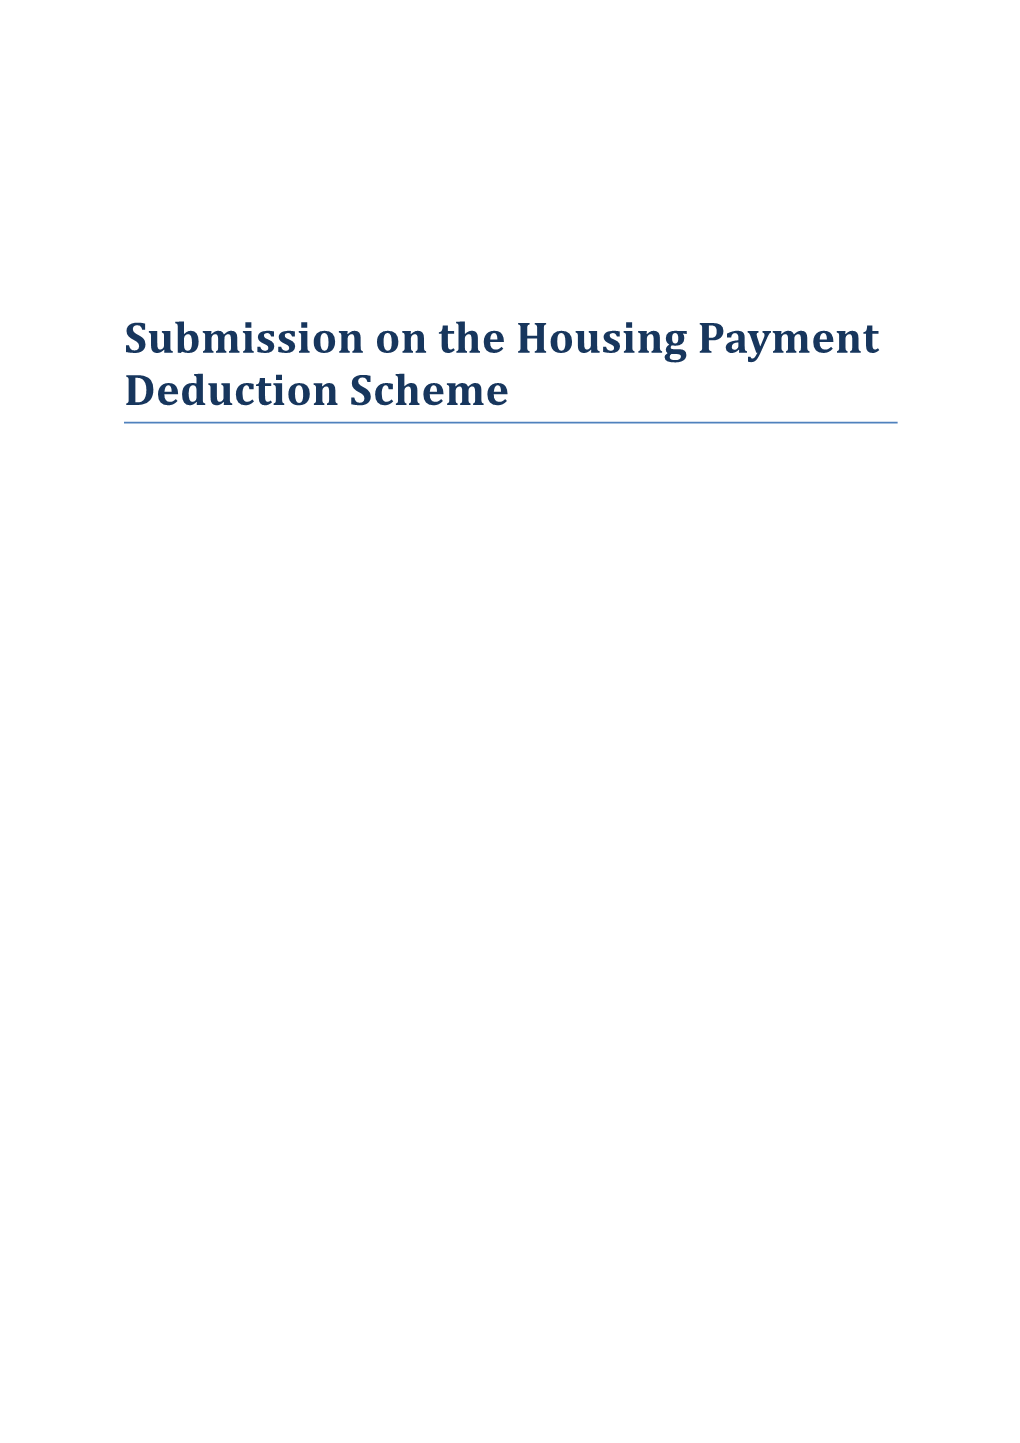 Submission on the Housing Payment Deduction Scheme